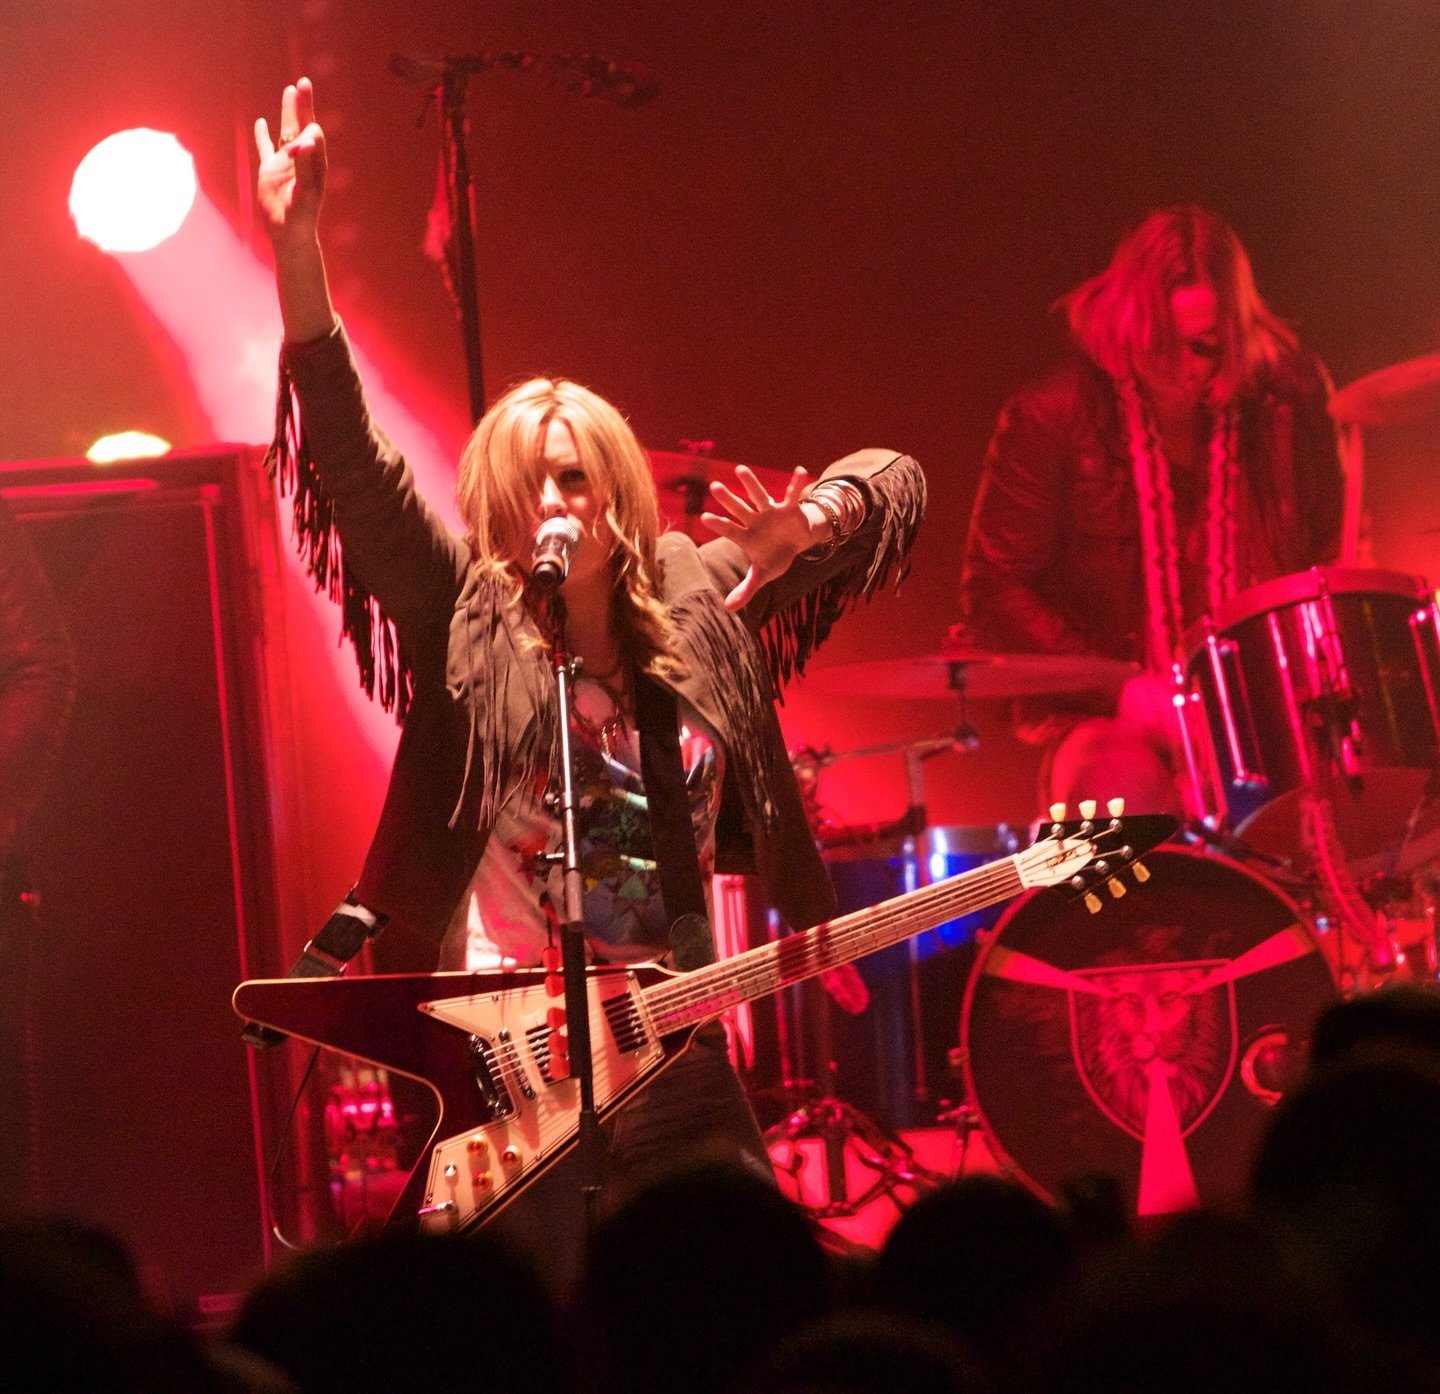 Grace Potter and the Nocturnals at Koka Booth Amphitheater, Cary, NC. October 19, 2012. 📷&copy;rebeccakane @graciepotter